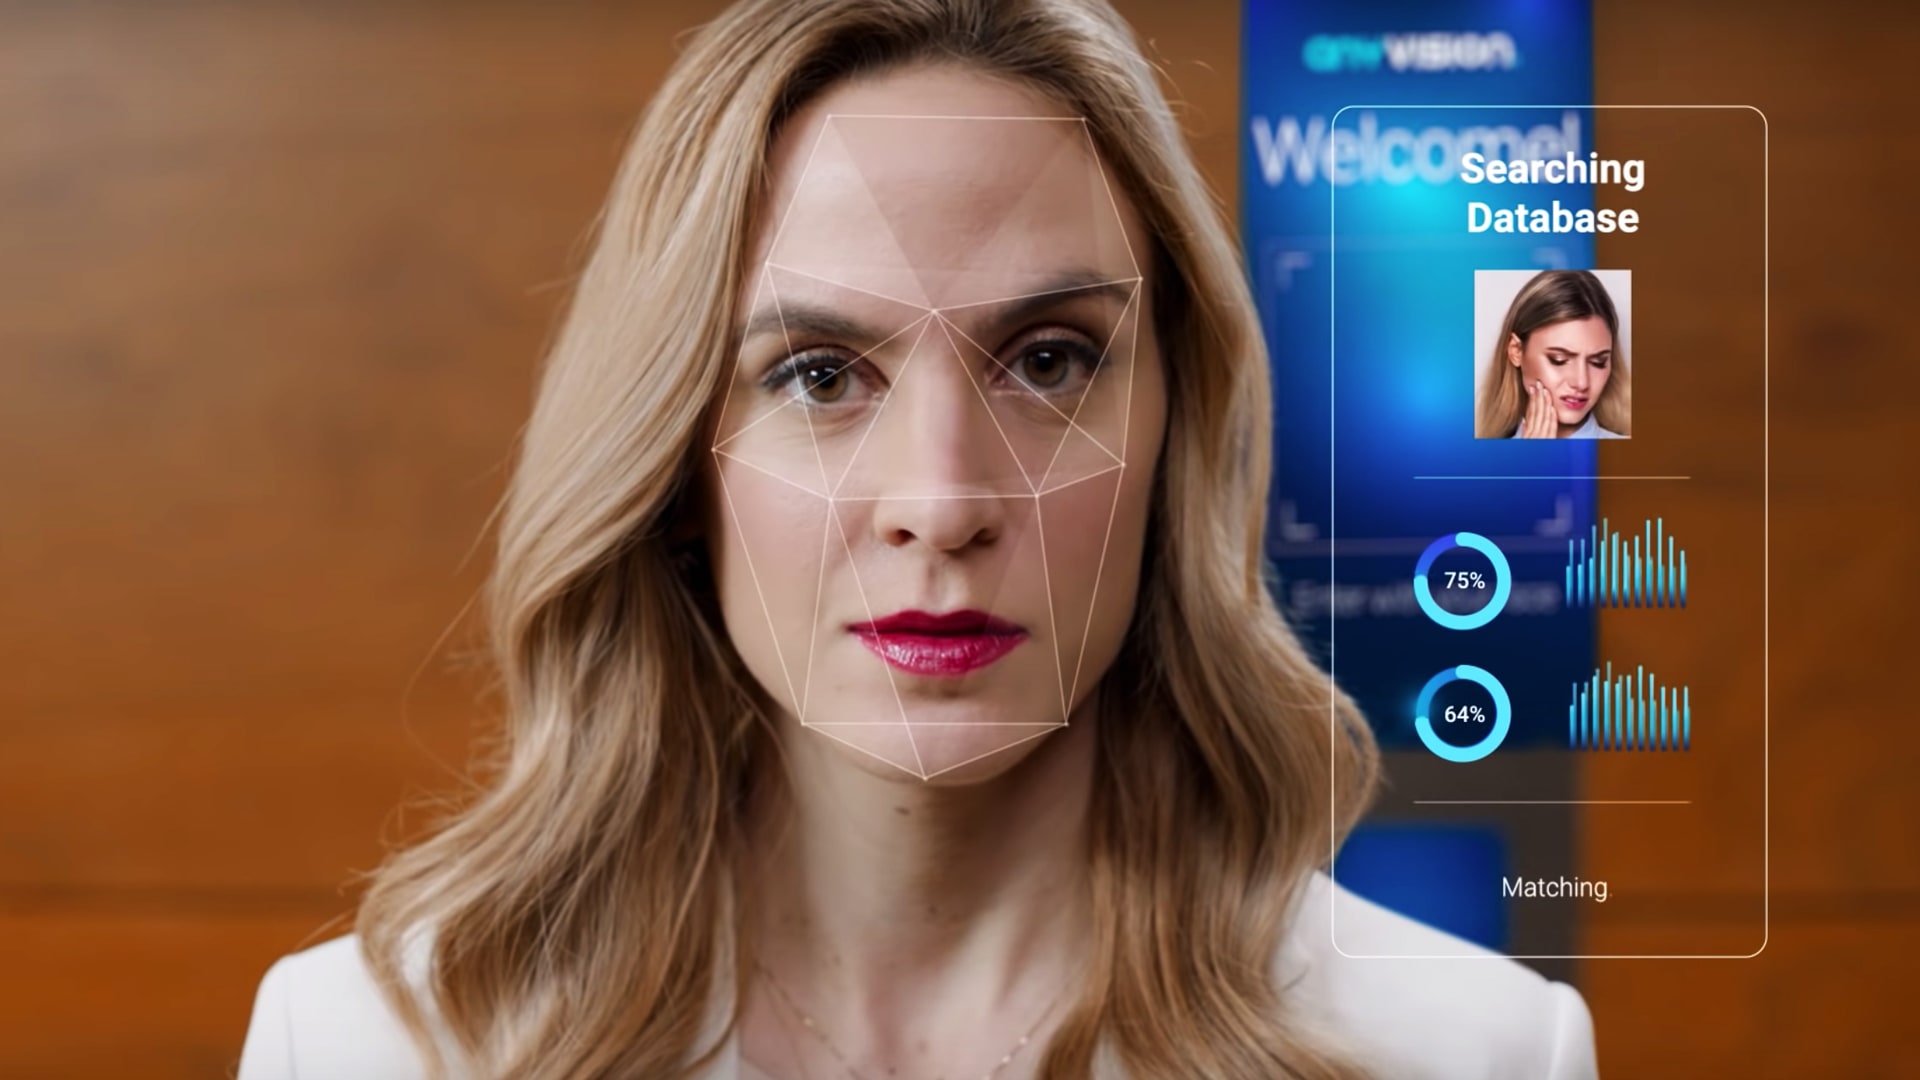 Microsoft-backed facial recognition firm rethinks its role in Hong Kong